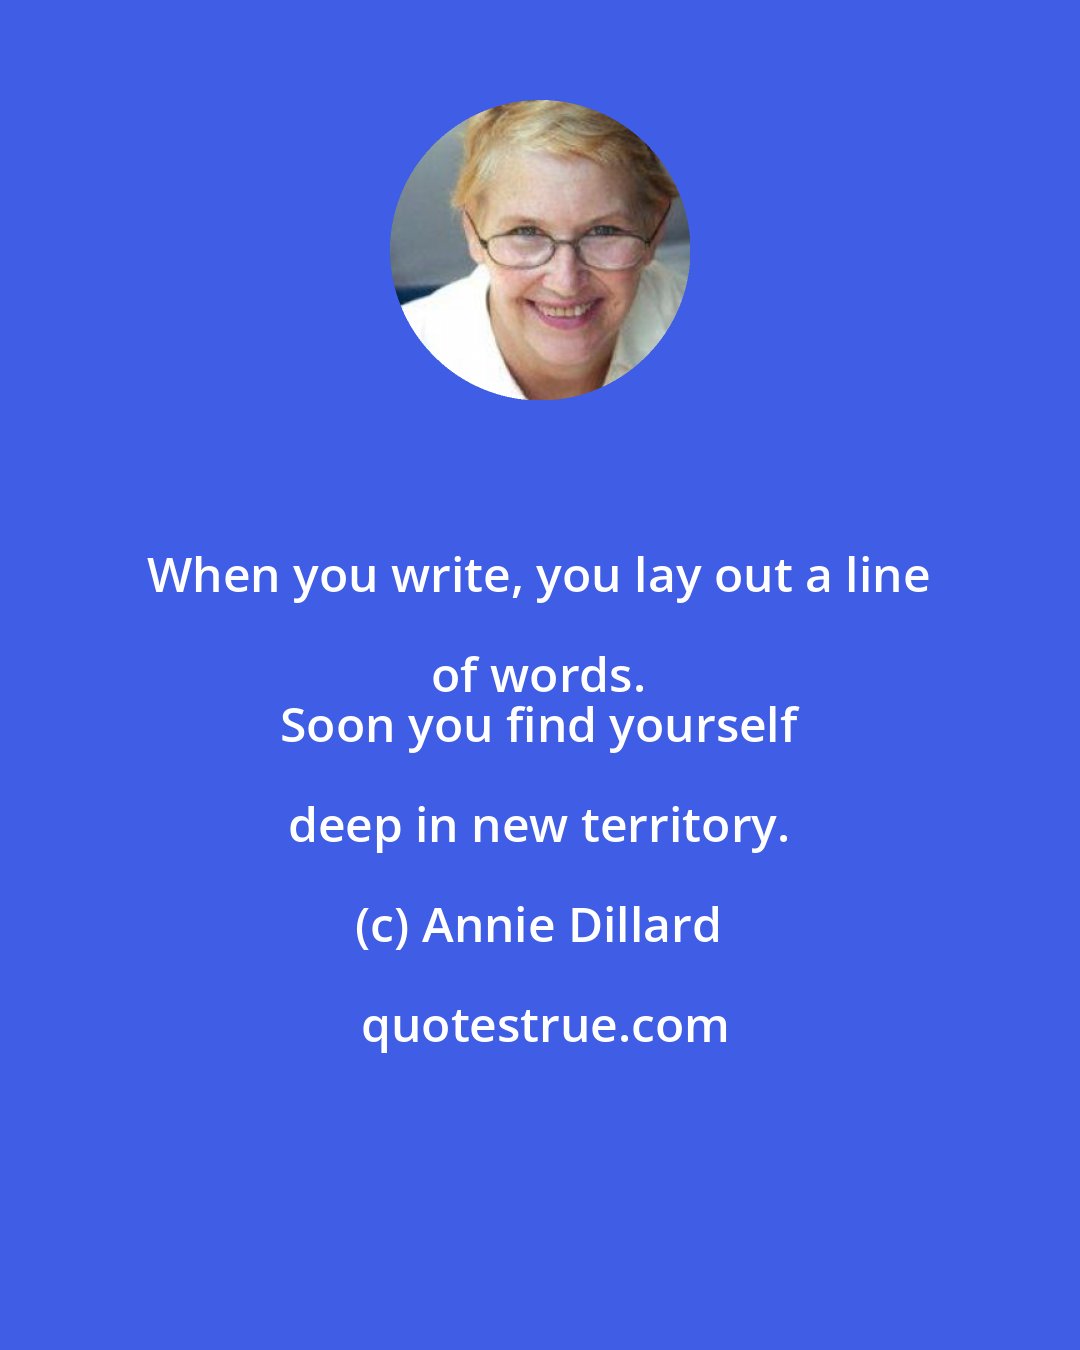 Annie Dillard: When you write, you lay out a line of words. 
 Soon you find yourself deep in new territory.